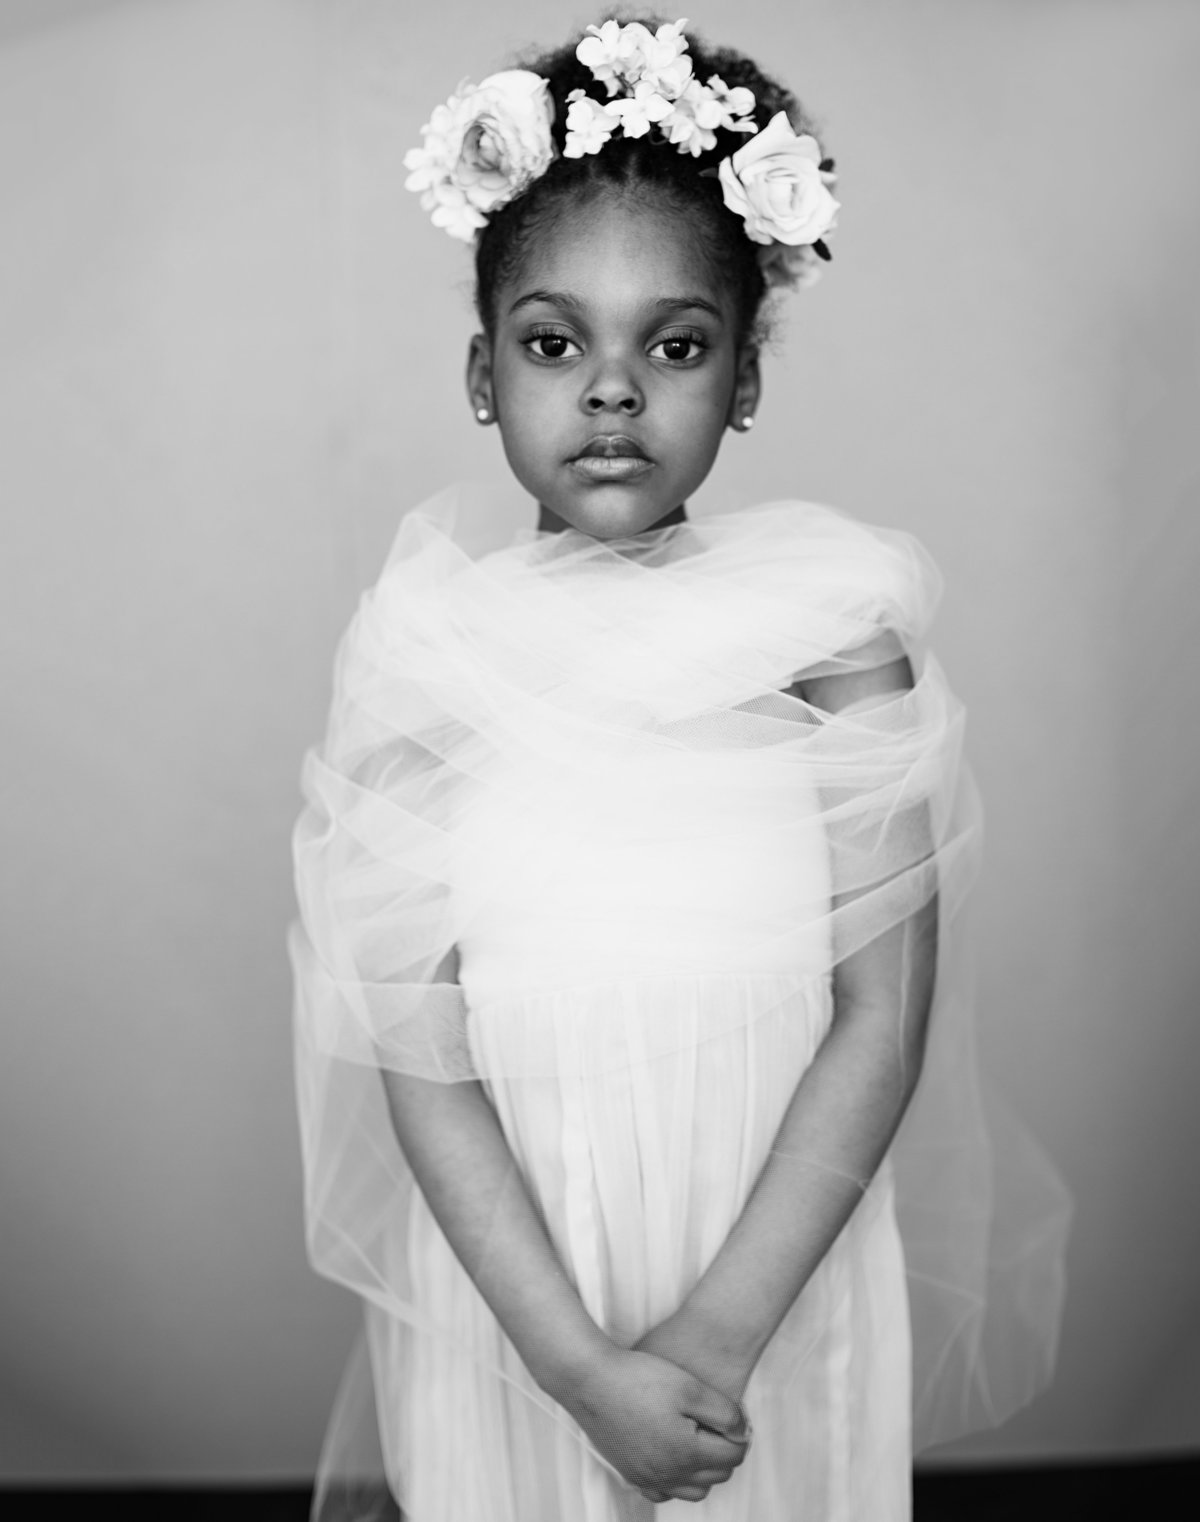 An African American black girl with a flower crown looks into the camera as she poses for a black and white portrait taken at Janel Lee Photography studios in Cincinnati